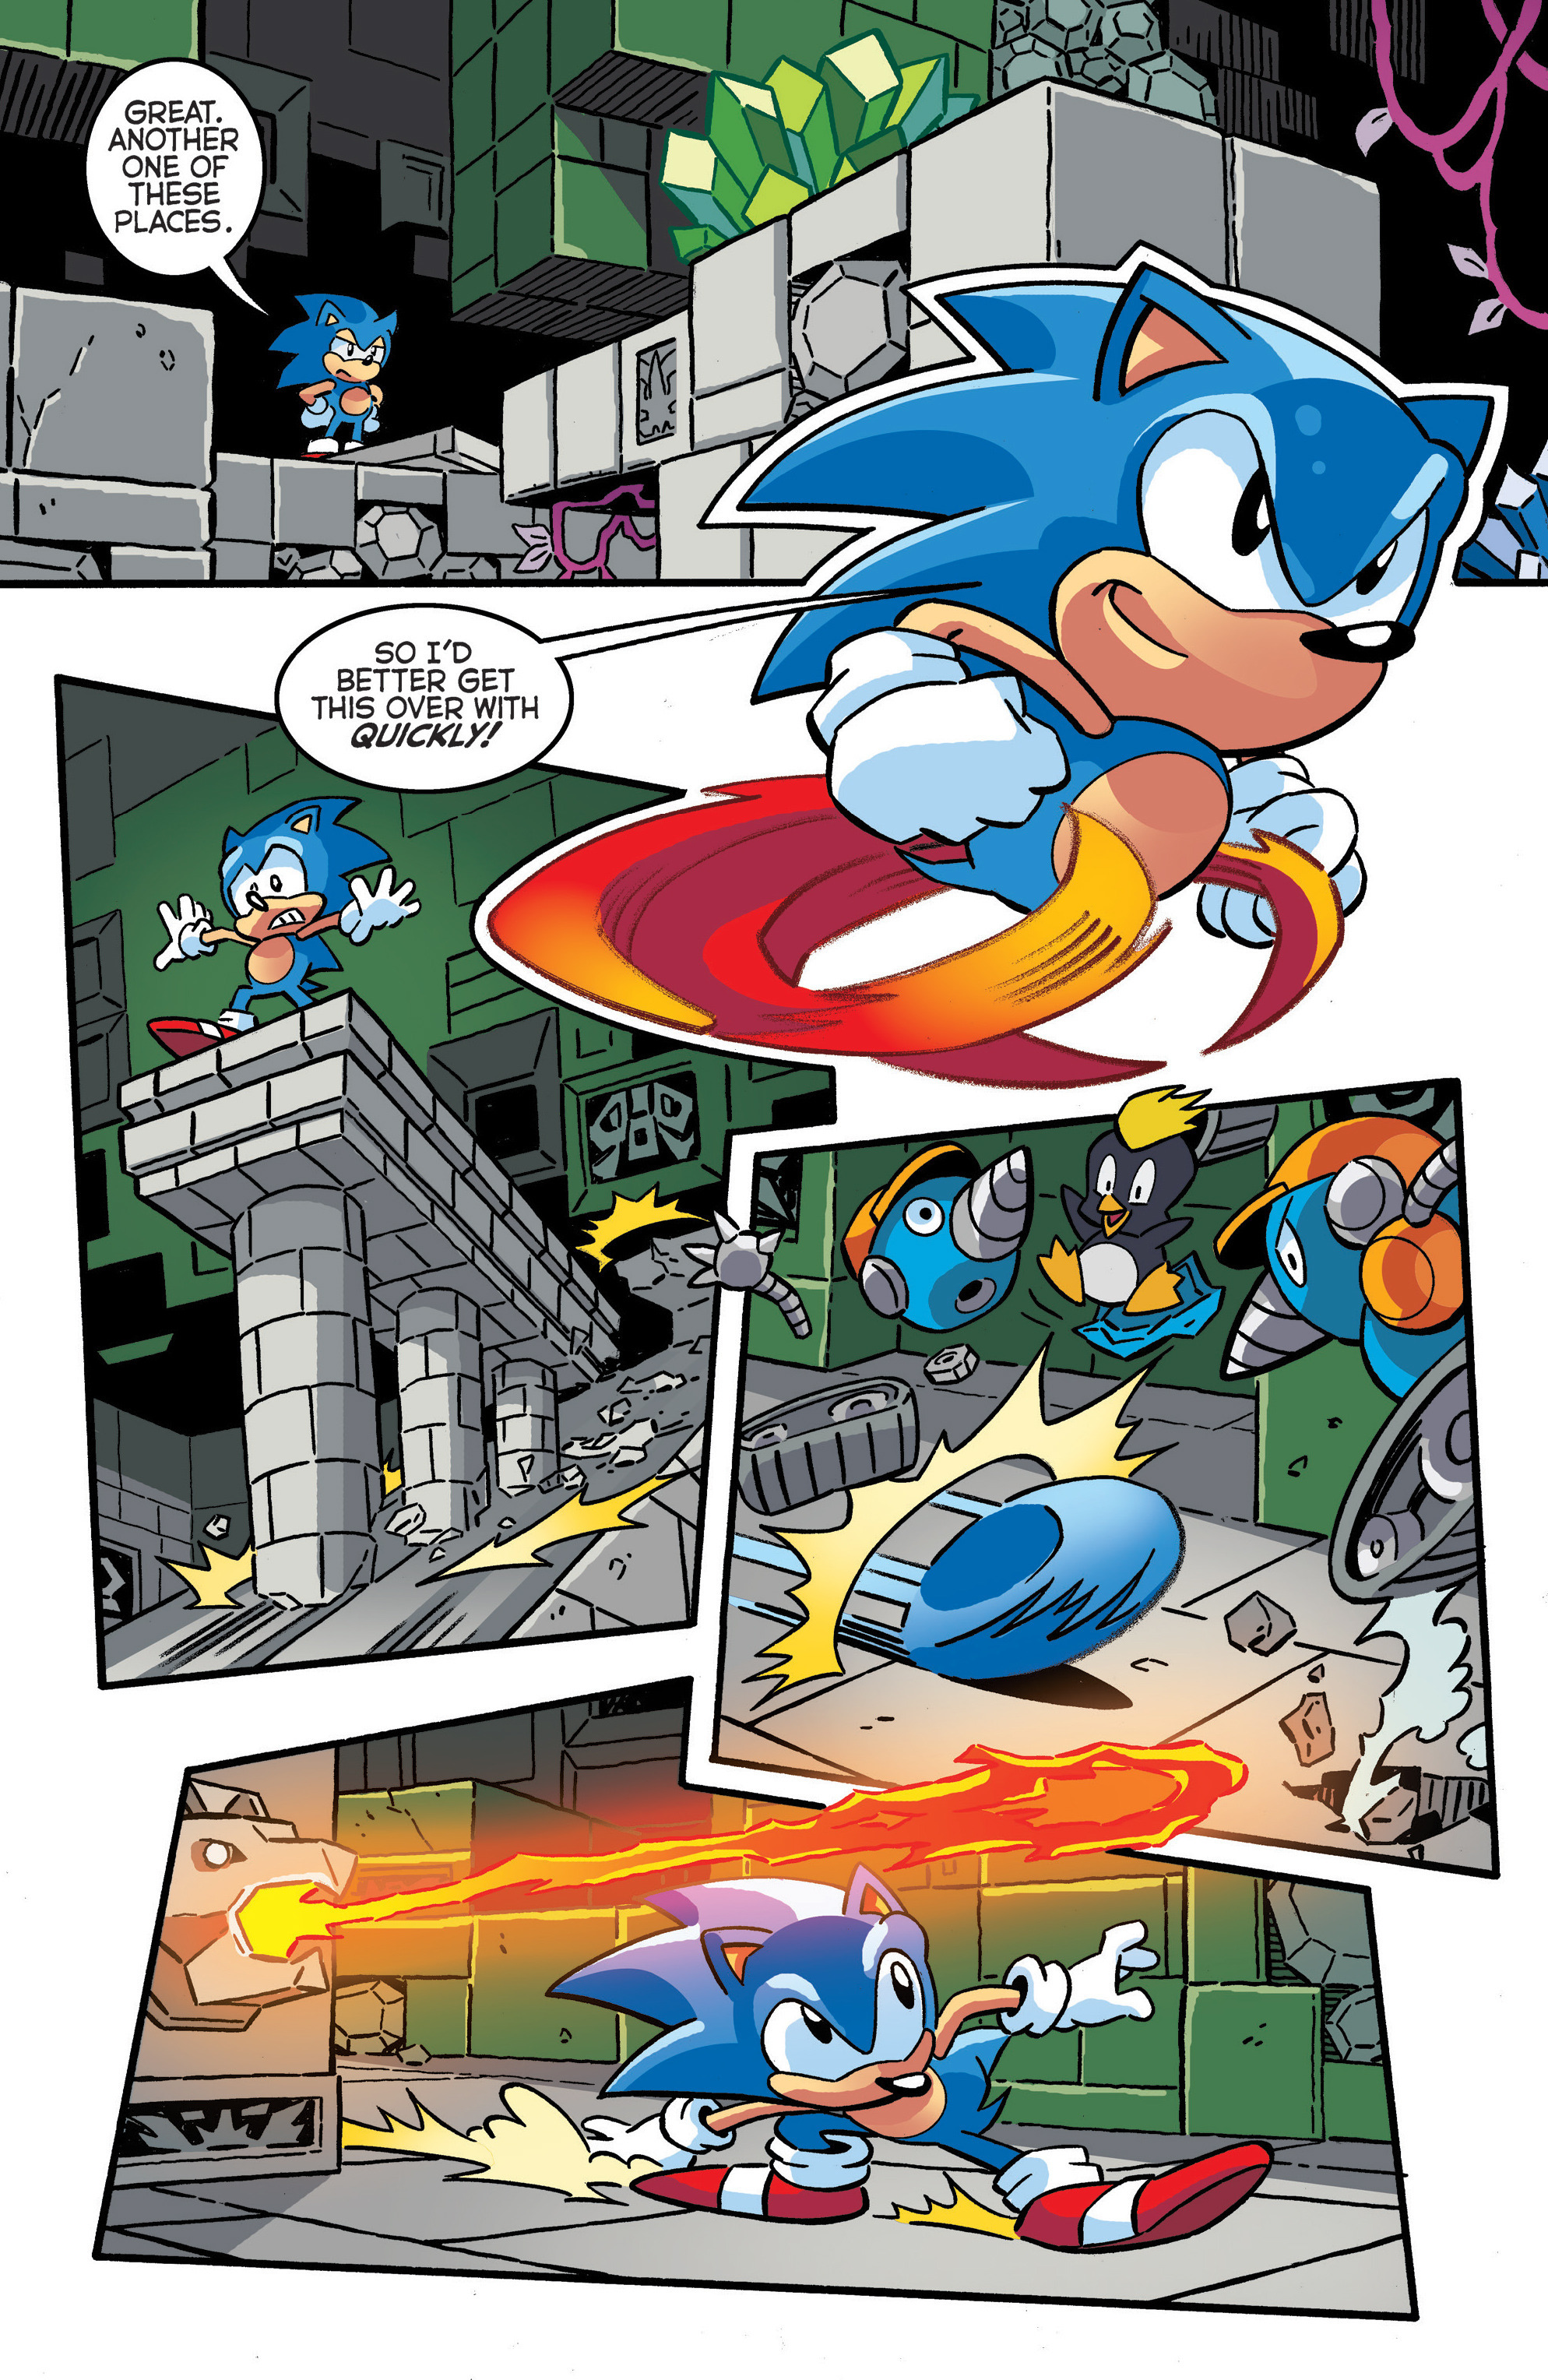 Sonic The Hedgeblog — From @HiddenPalaceOrg's May 17, 1993